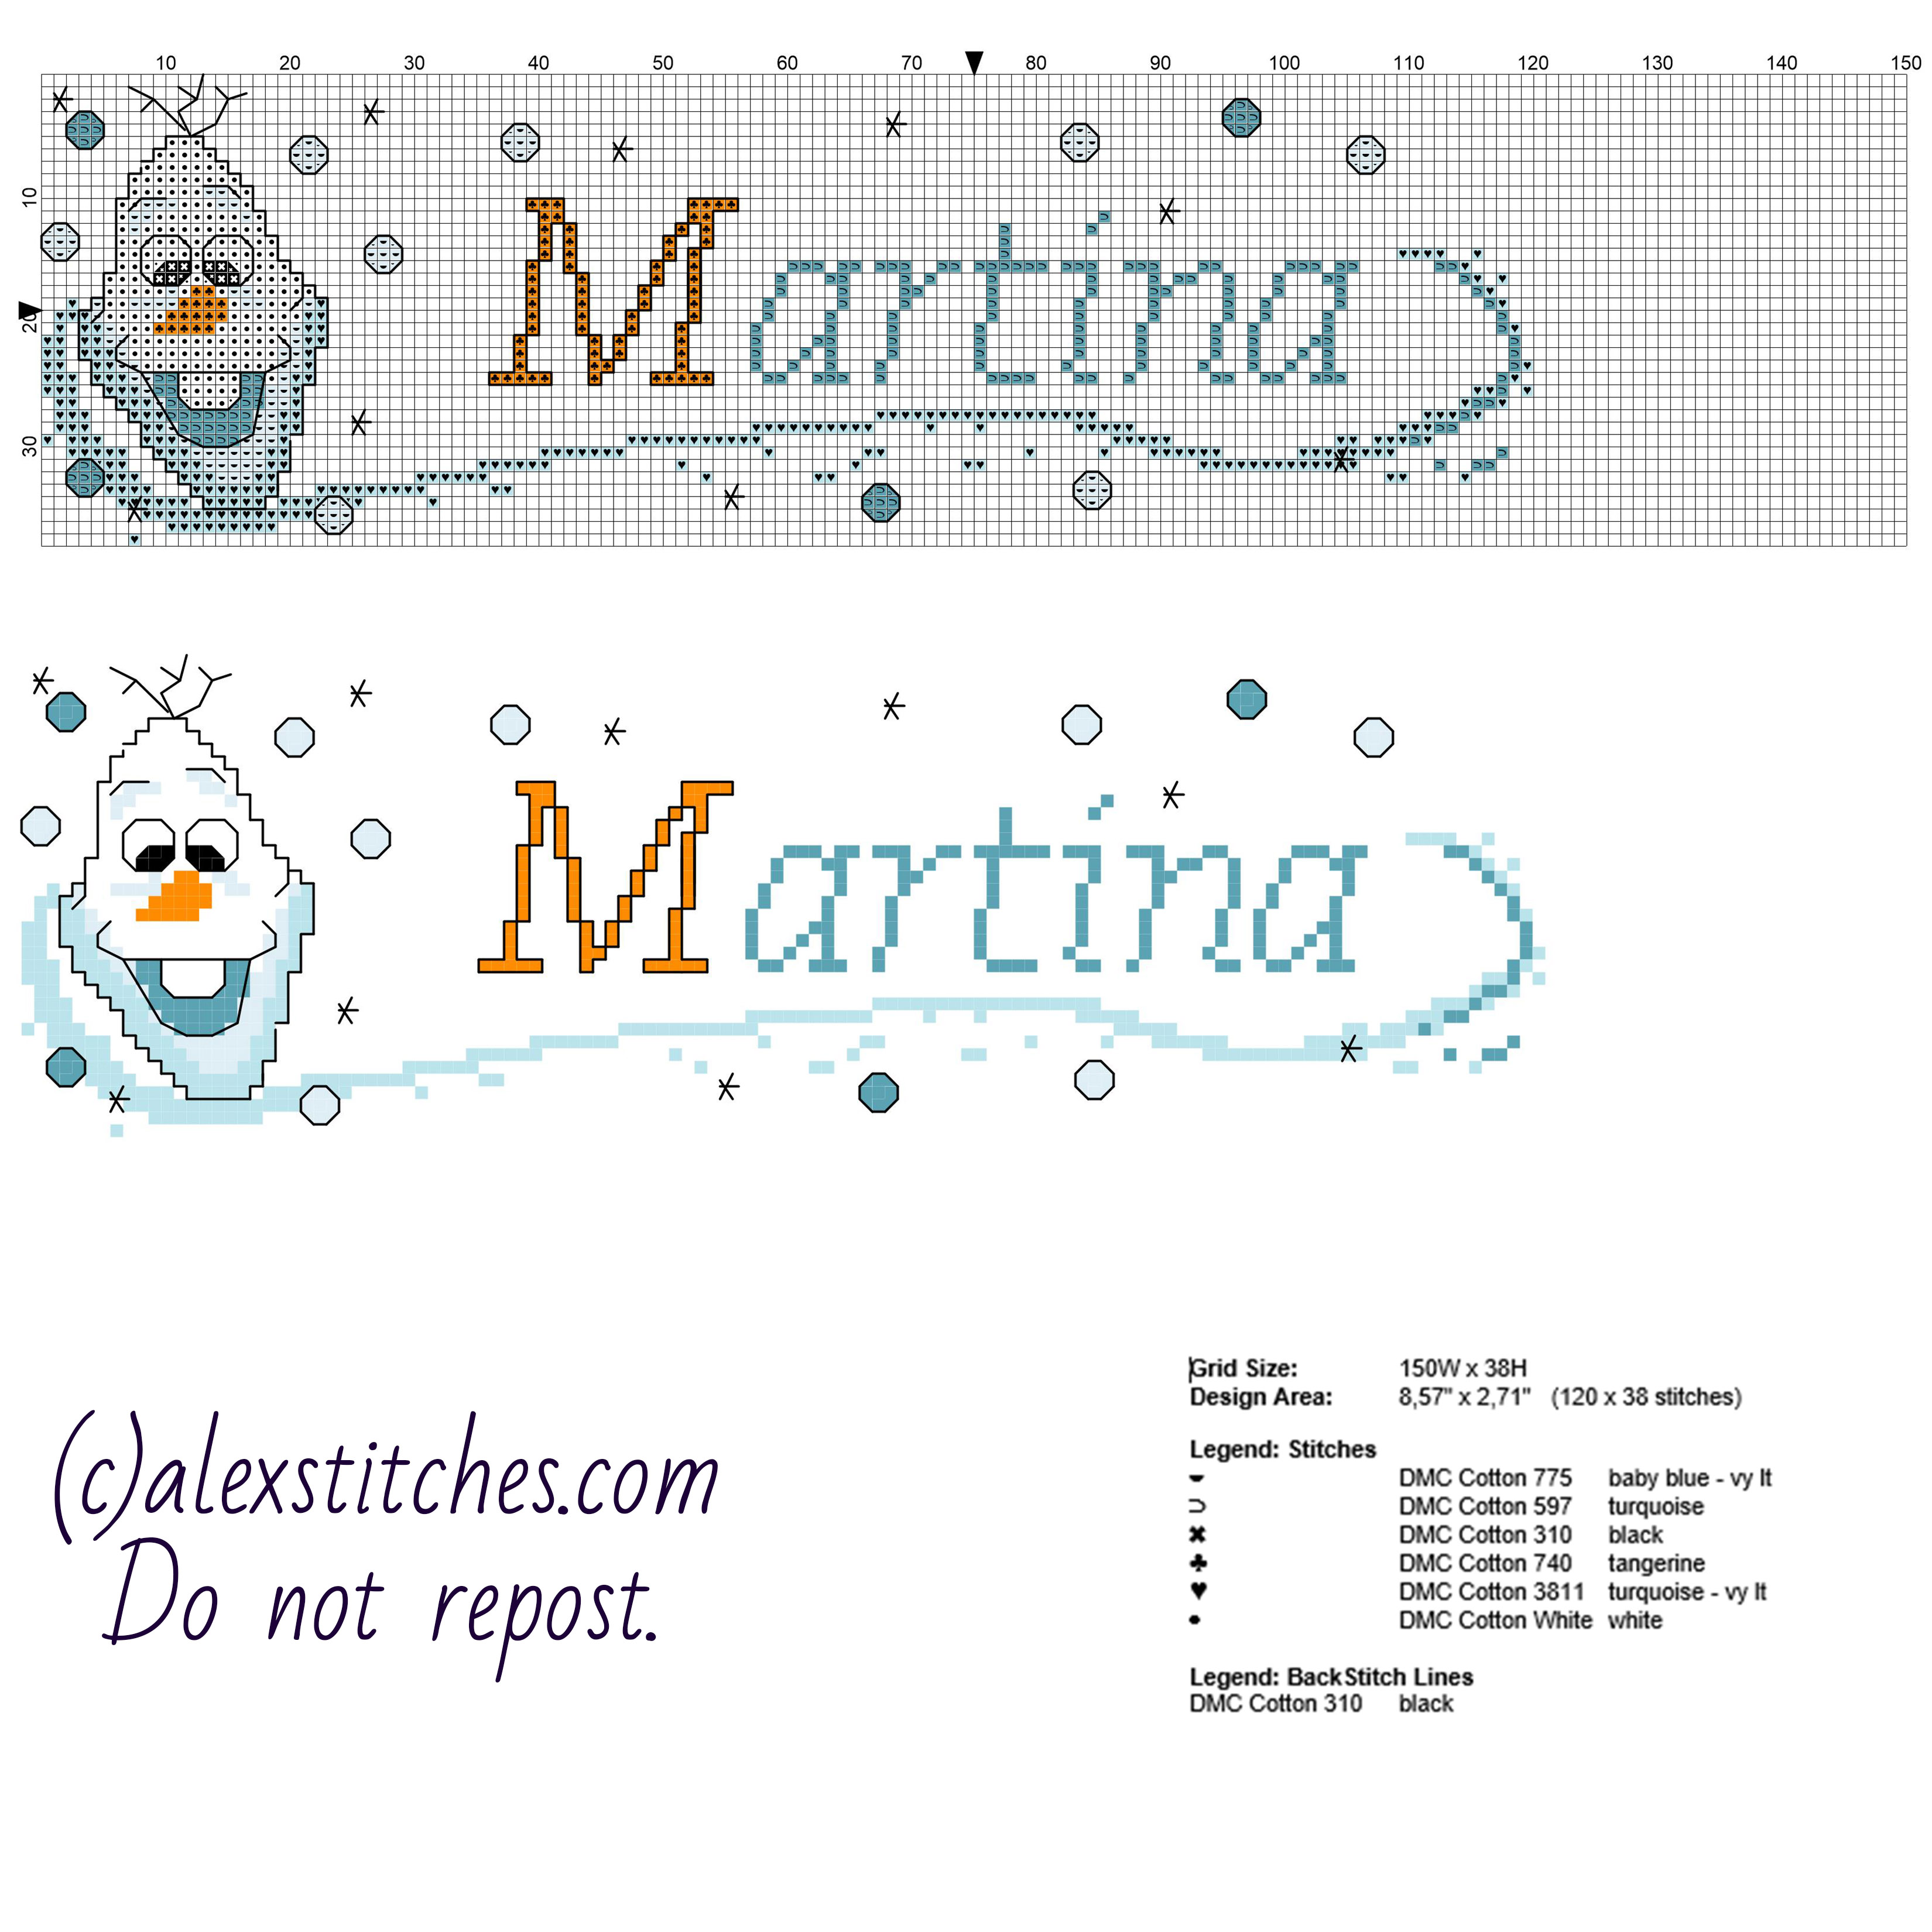 Cross stitch baby female name Martina with Disney Olaf character from Frozen cartoon